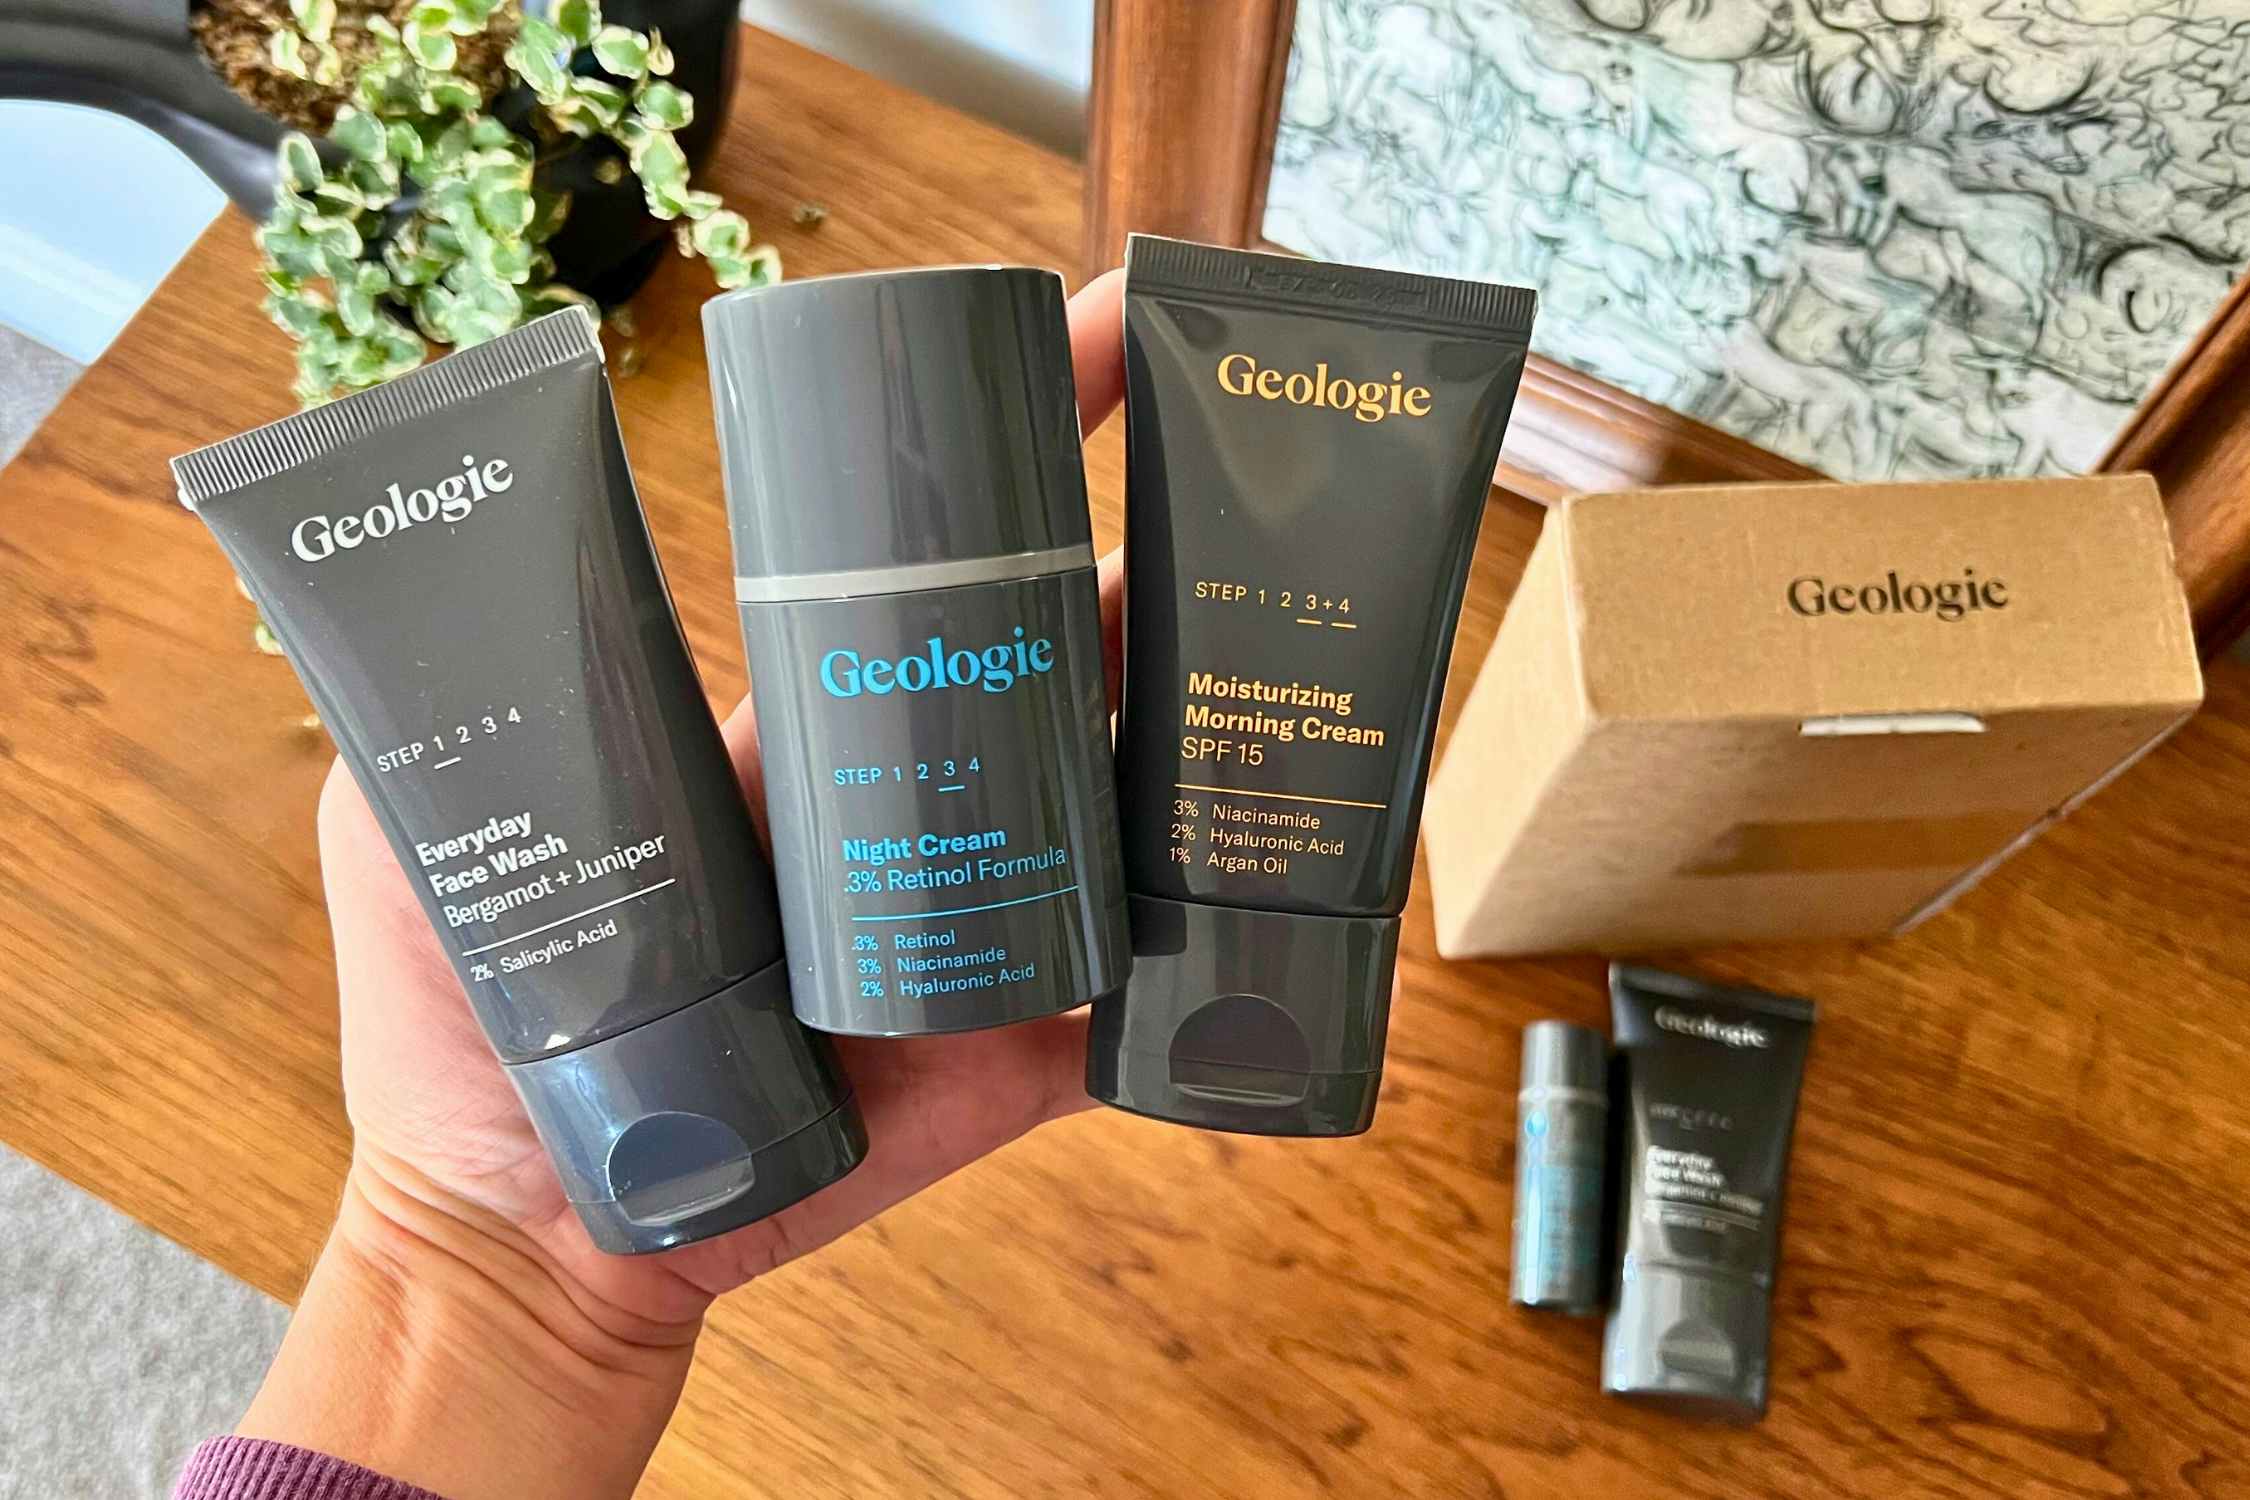 Get Your Geologie Skincare Set for Free — Just Pay $4.95 Shipping